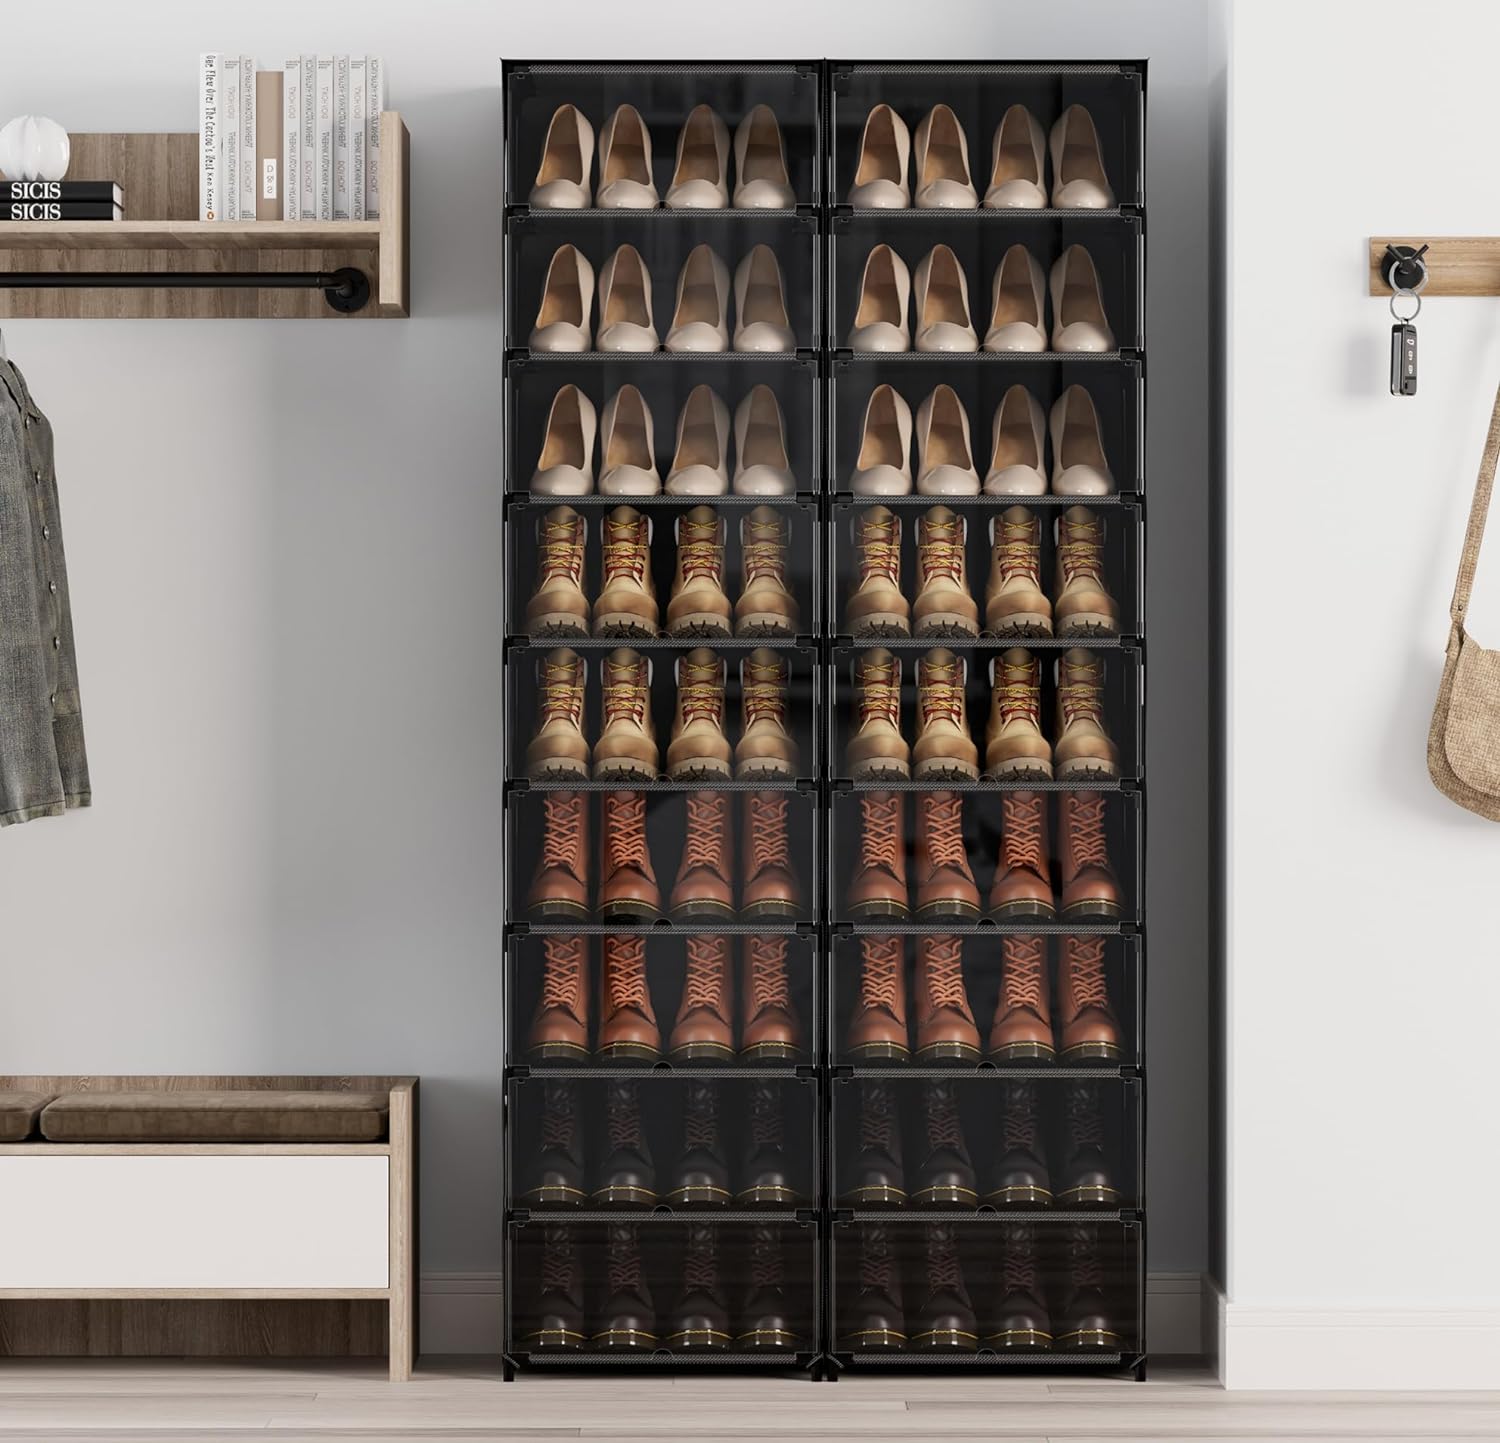 Large Shoe Rack Organizer Storage, 9 Tier Tall Shoes Rack for